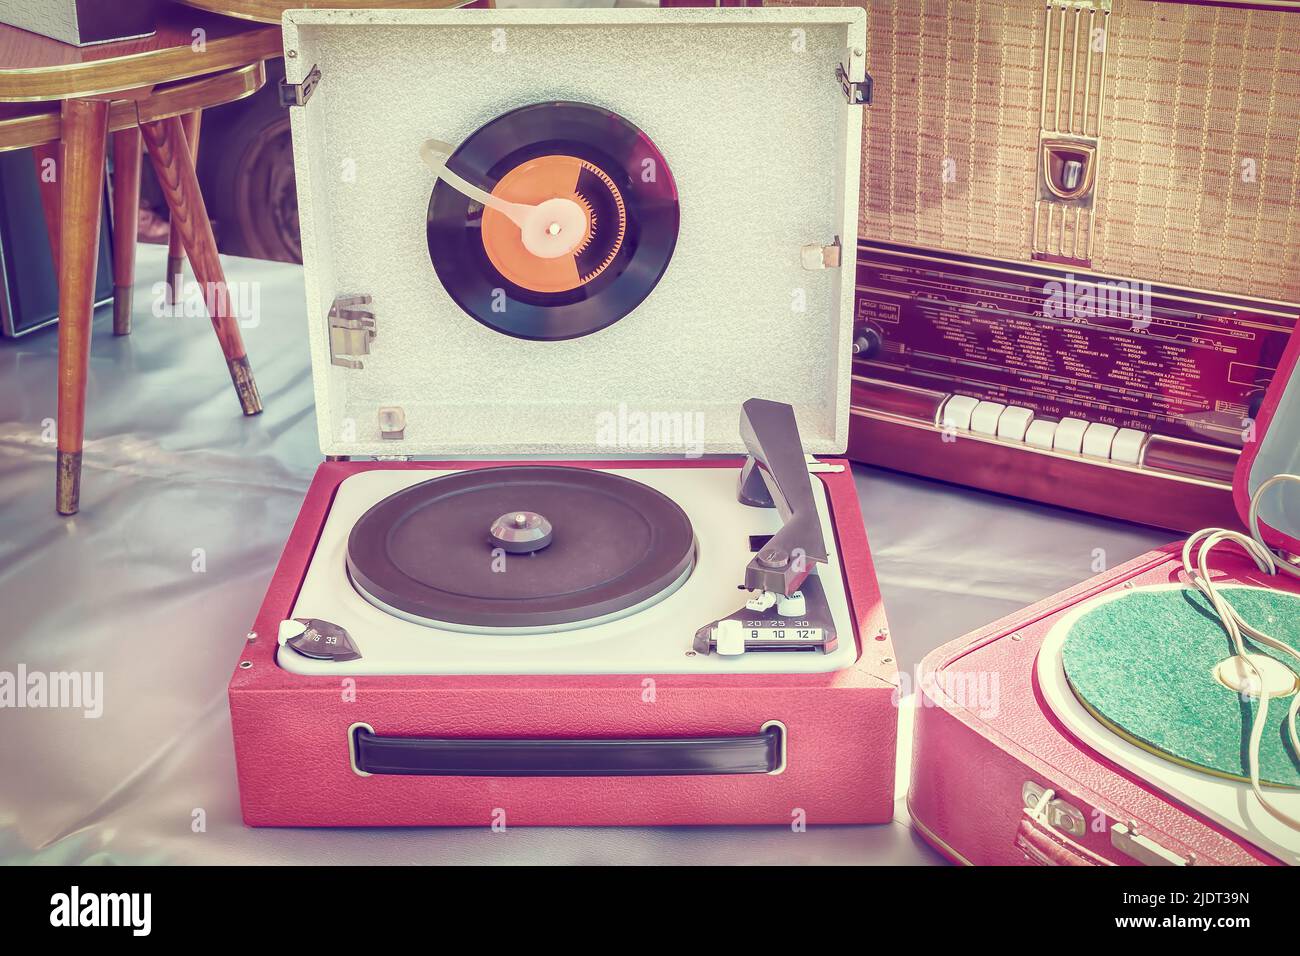 Retro styled image of an old record player on a flee market Stock Photo